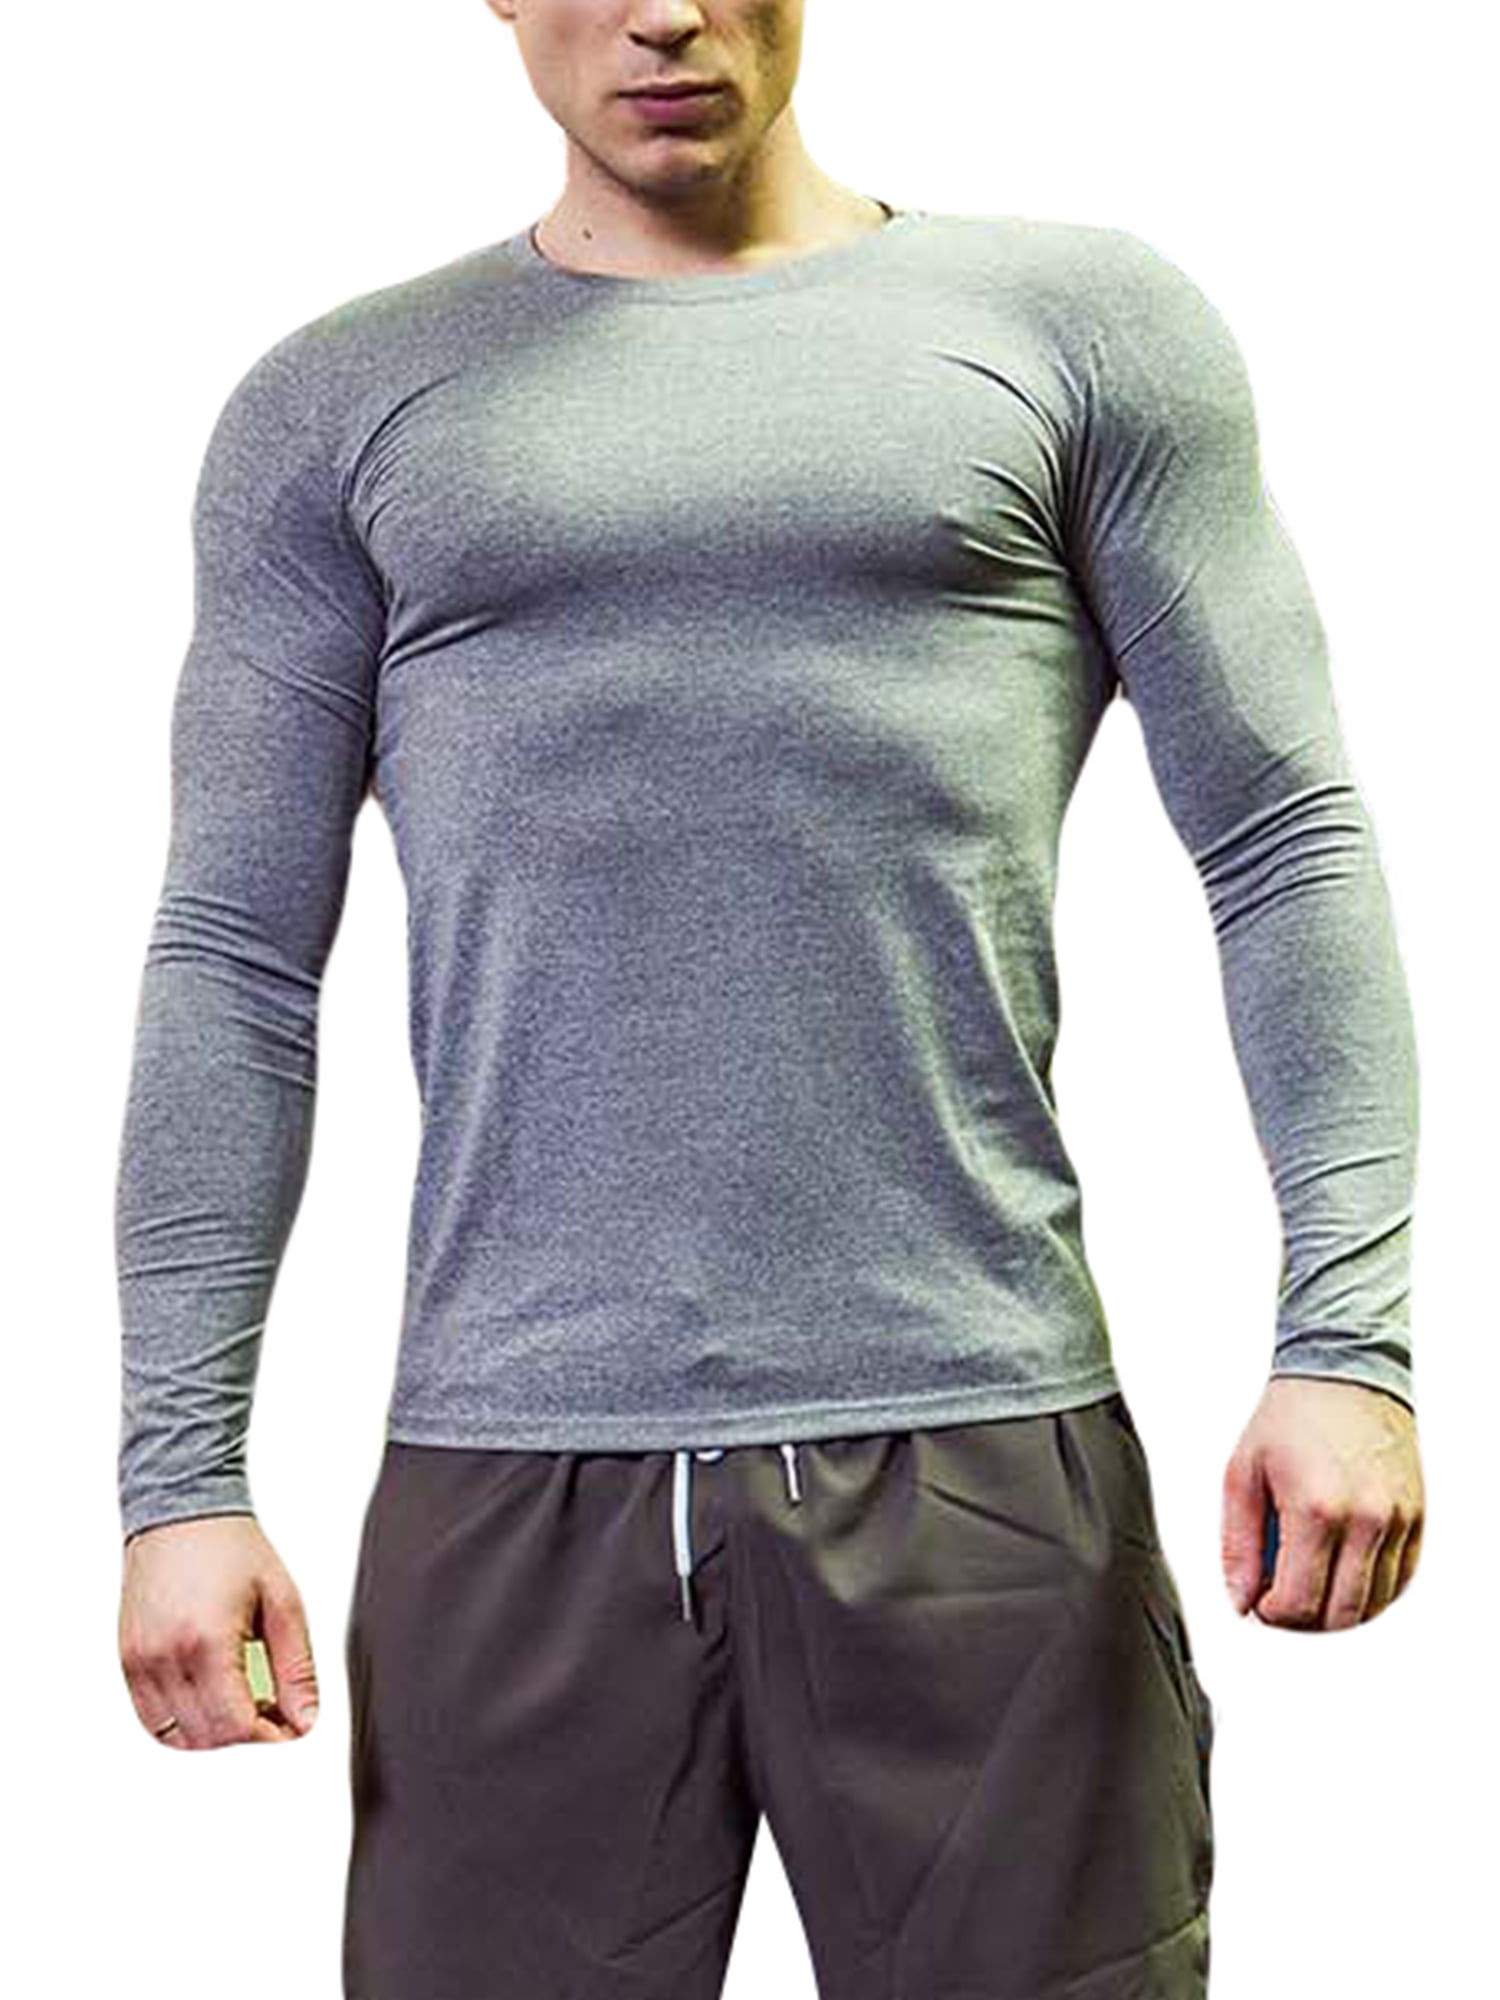 Mens Compression Long Sleeve Running Shirt Thermal Base Layer Gym Fit Sport Tops 